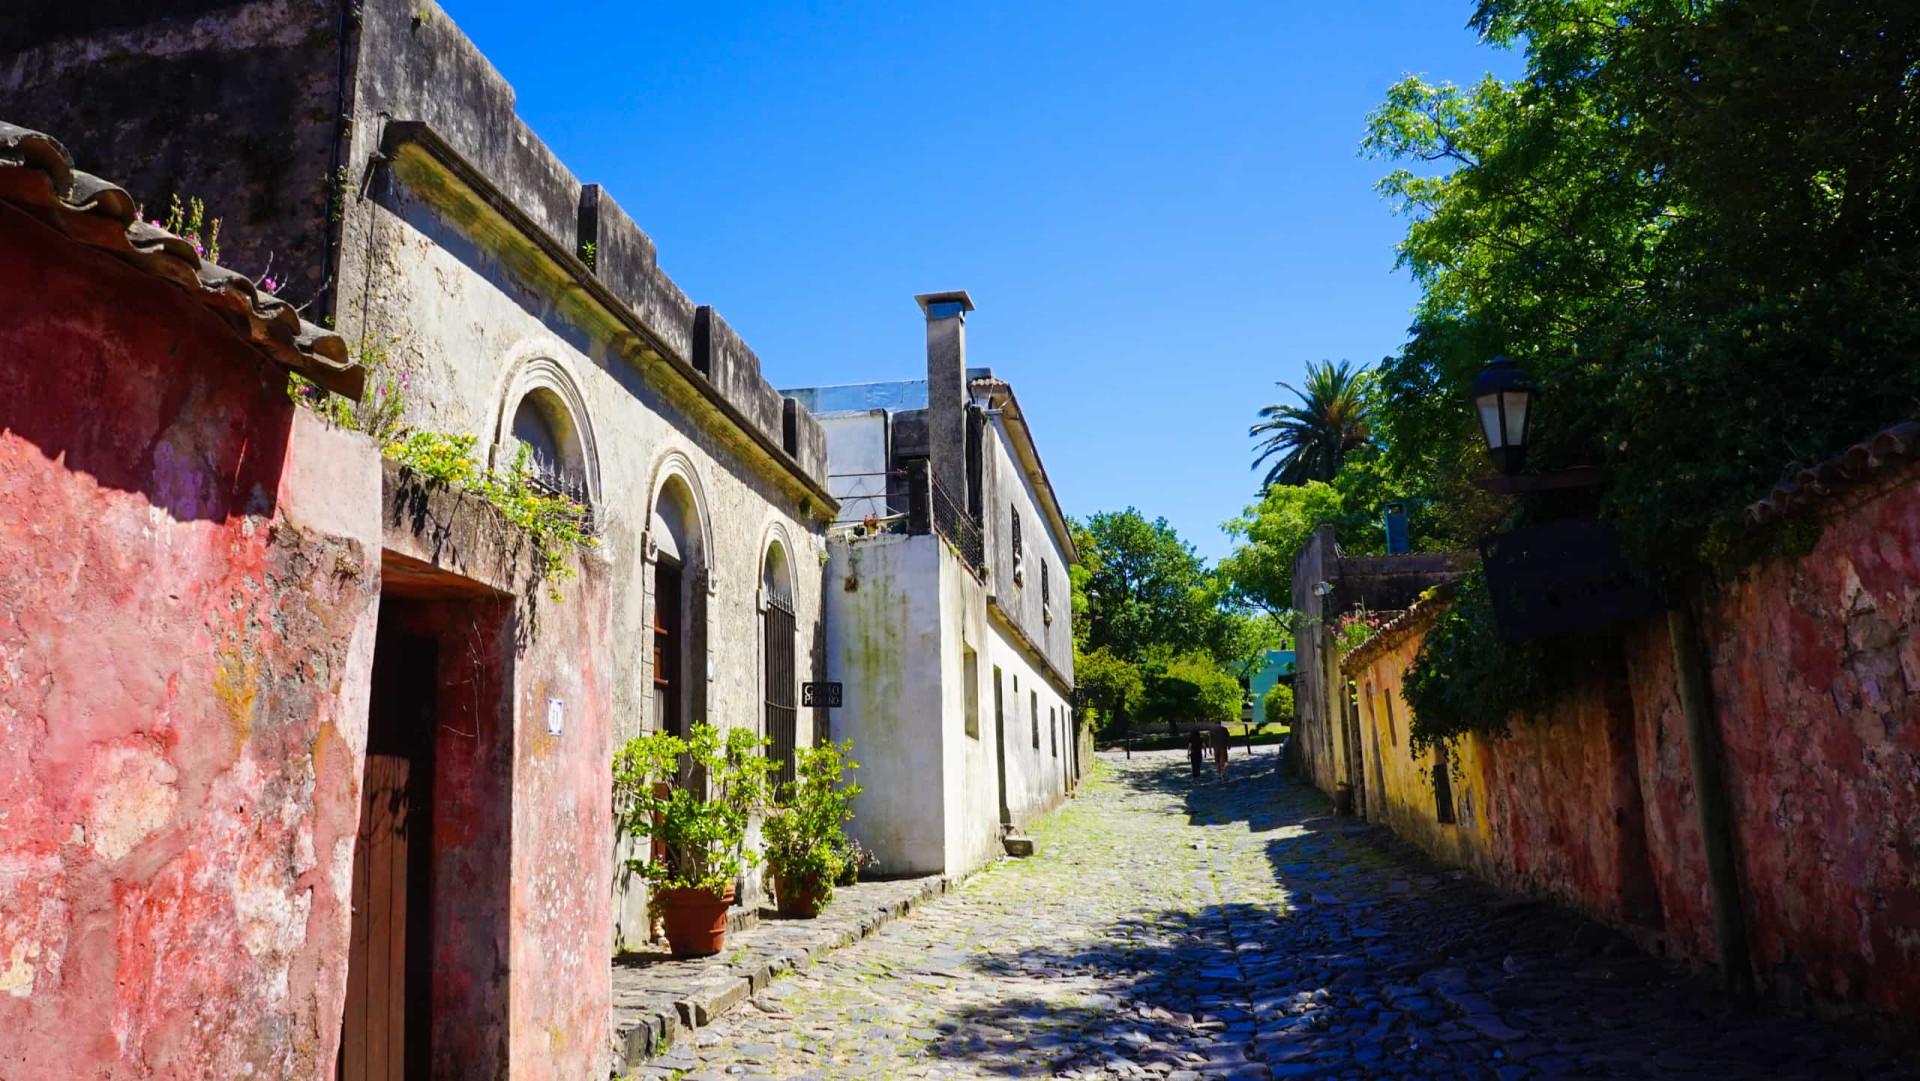 <p>Location: Colonia<br>Criteria: Cultural<br>Year established: 1995<br>Description: The many Spanish and Portuguese colonial style buildings include the famous city gate and wooden drawbridge (pictured), as well as the early 19th-century Basílica del Santísimo Sacramento.</p><p><a href="https://www.msn.com/en-us/community/channel/vid-7xx8mnucu55yw63we9va2gwr7uihbxwc68fxqp25x6tg4ftibpra?cvid=94631541bc0f4f89bfd59158d696ad7e">Follow us and access great exclusive content every day</a></p>